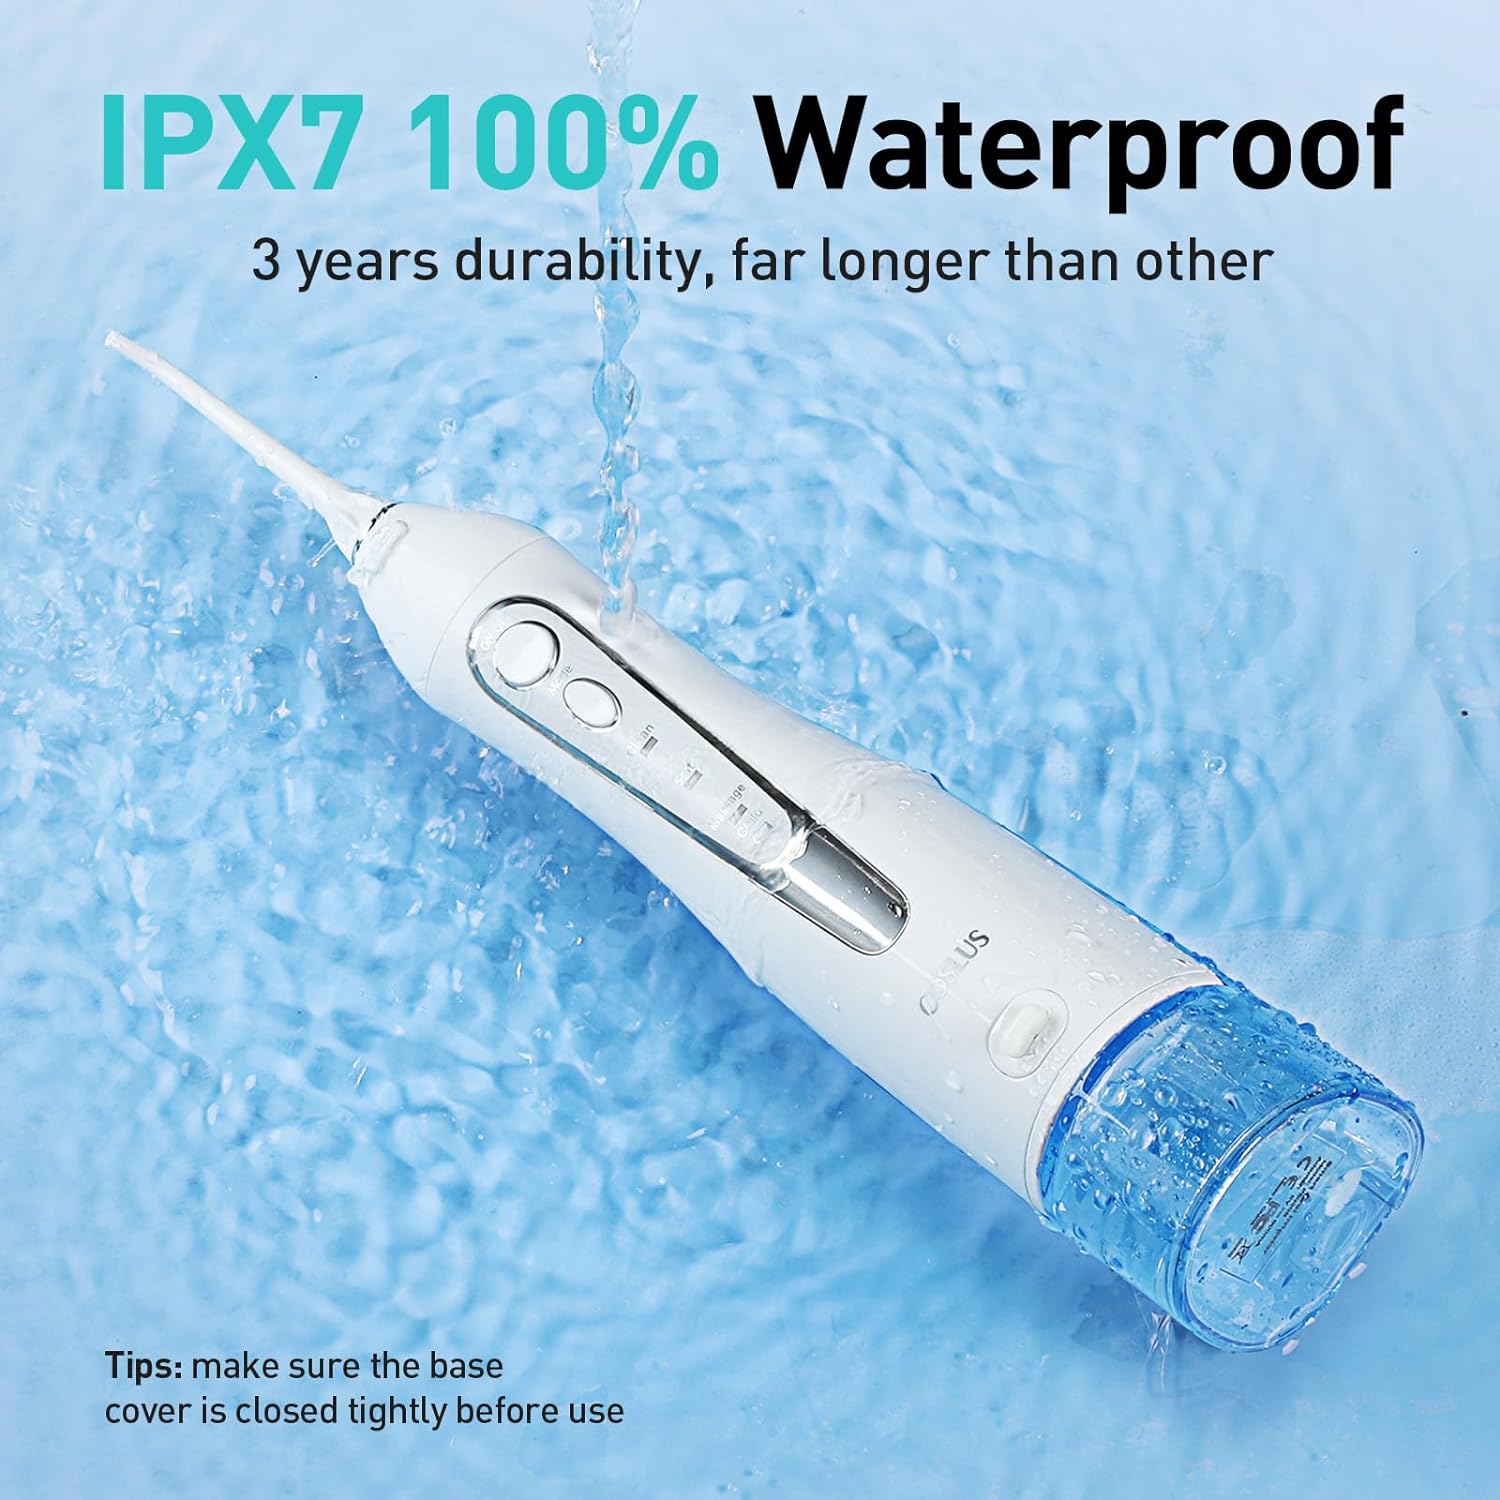 Water Dental Flosser Teeth Pick: Upgrade Child Mode Portable Cordless Oral Irrigator 300ML Rechargeable Travel Irrigation Cleaner IPX7 Waterproof Electric Flossing Machine for Teeth Cleaning F5020E